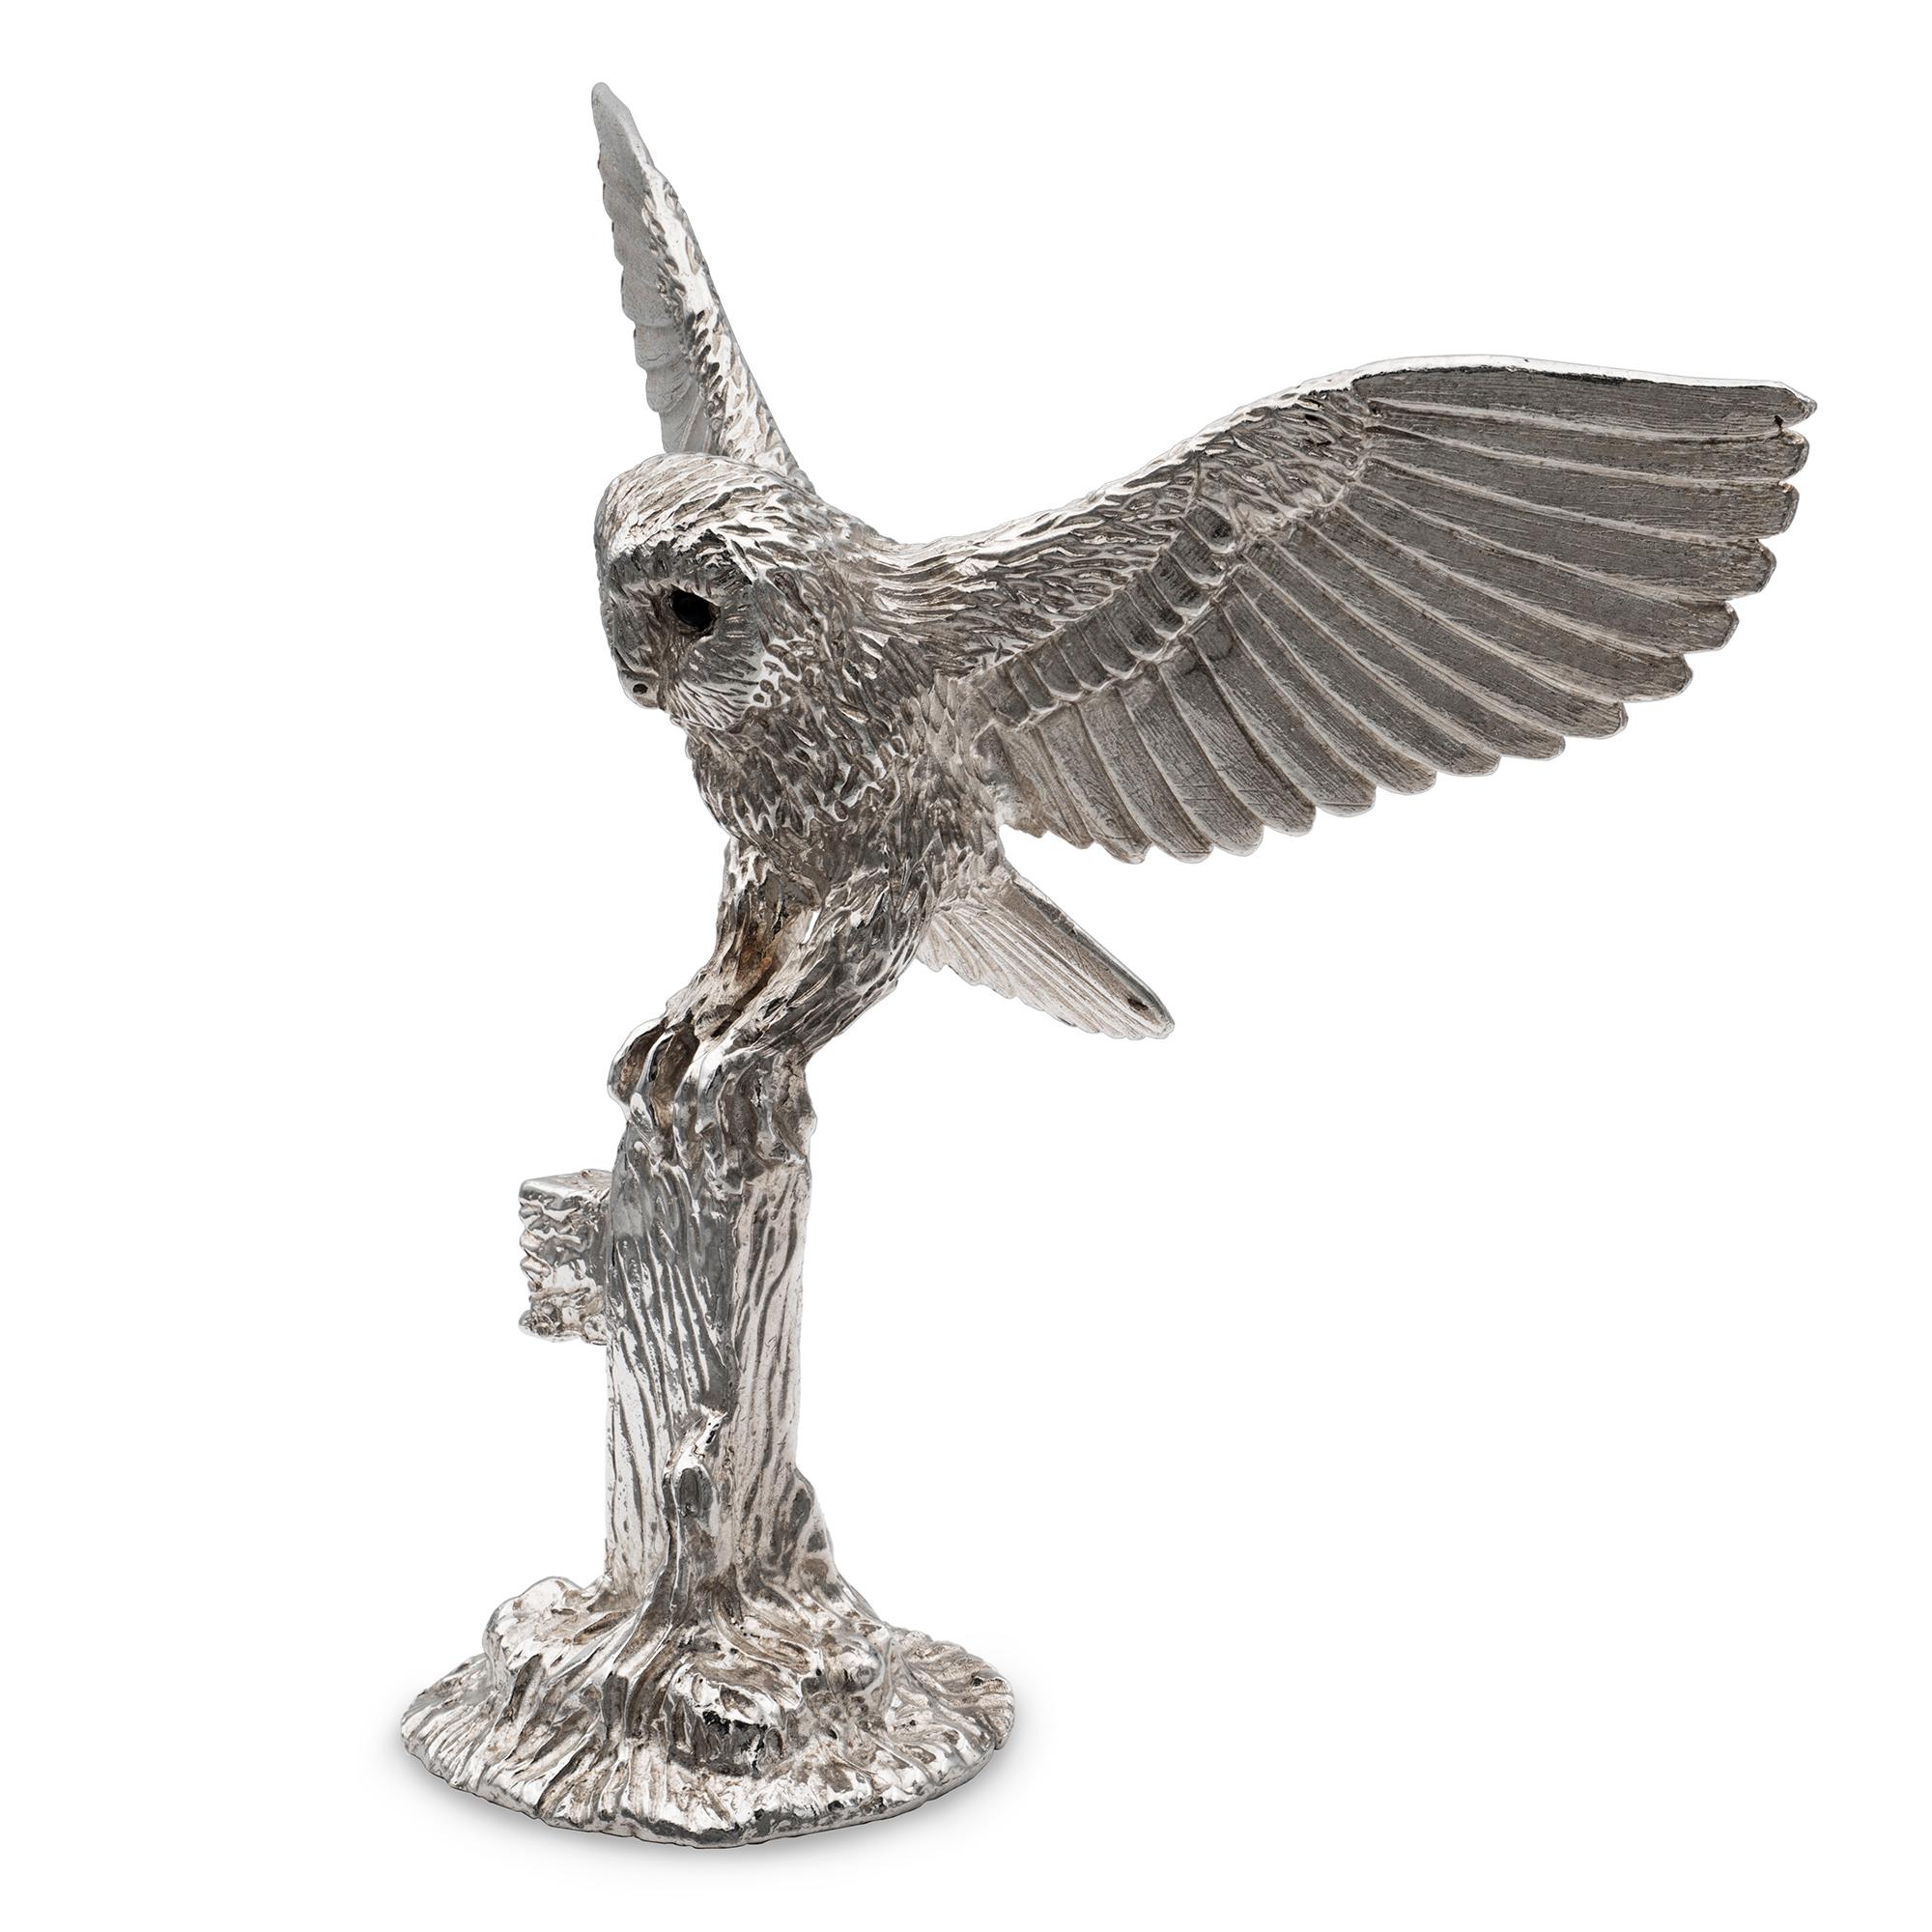 A sterling silver cast model of an out stretched winged owl on a post, the owl is set with black diamond eyes, height 8cms, weight 139gms, hallmarked London. 

Should you choose to make this purchase we would be delighted to send it to you in a